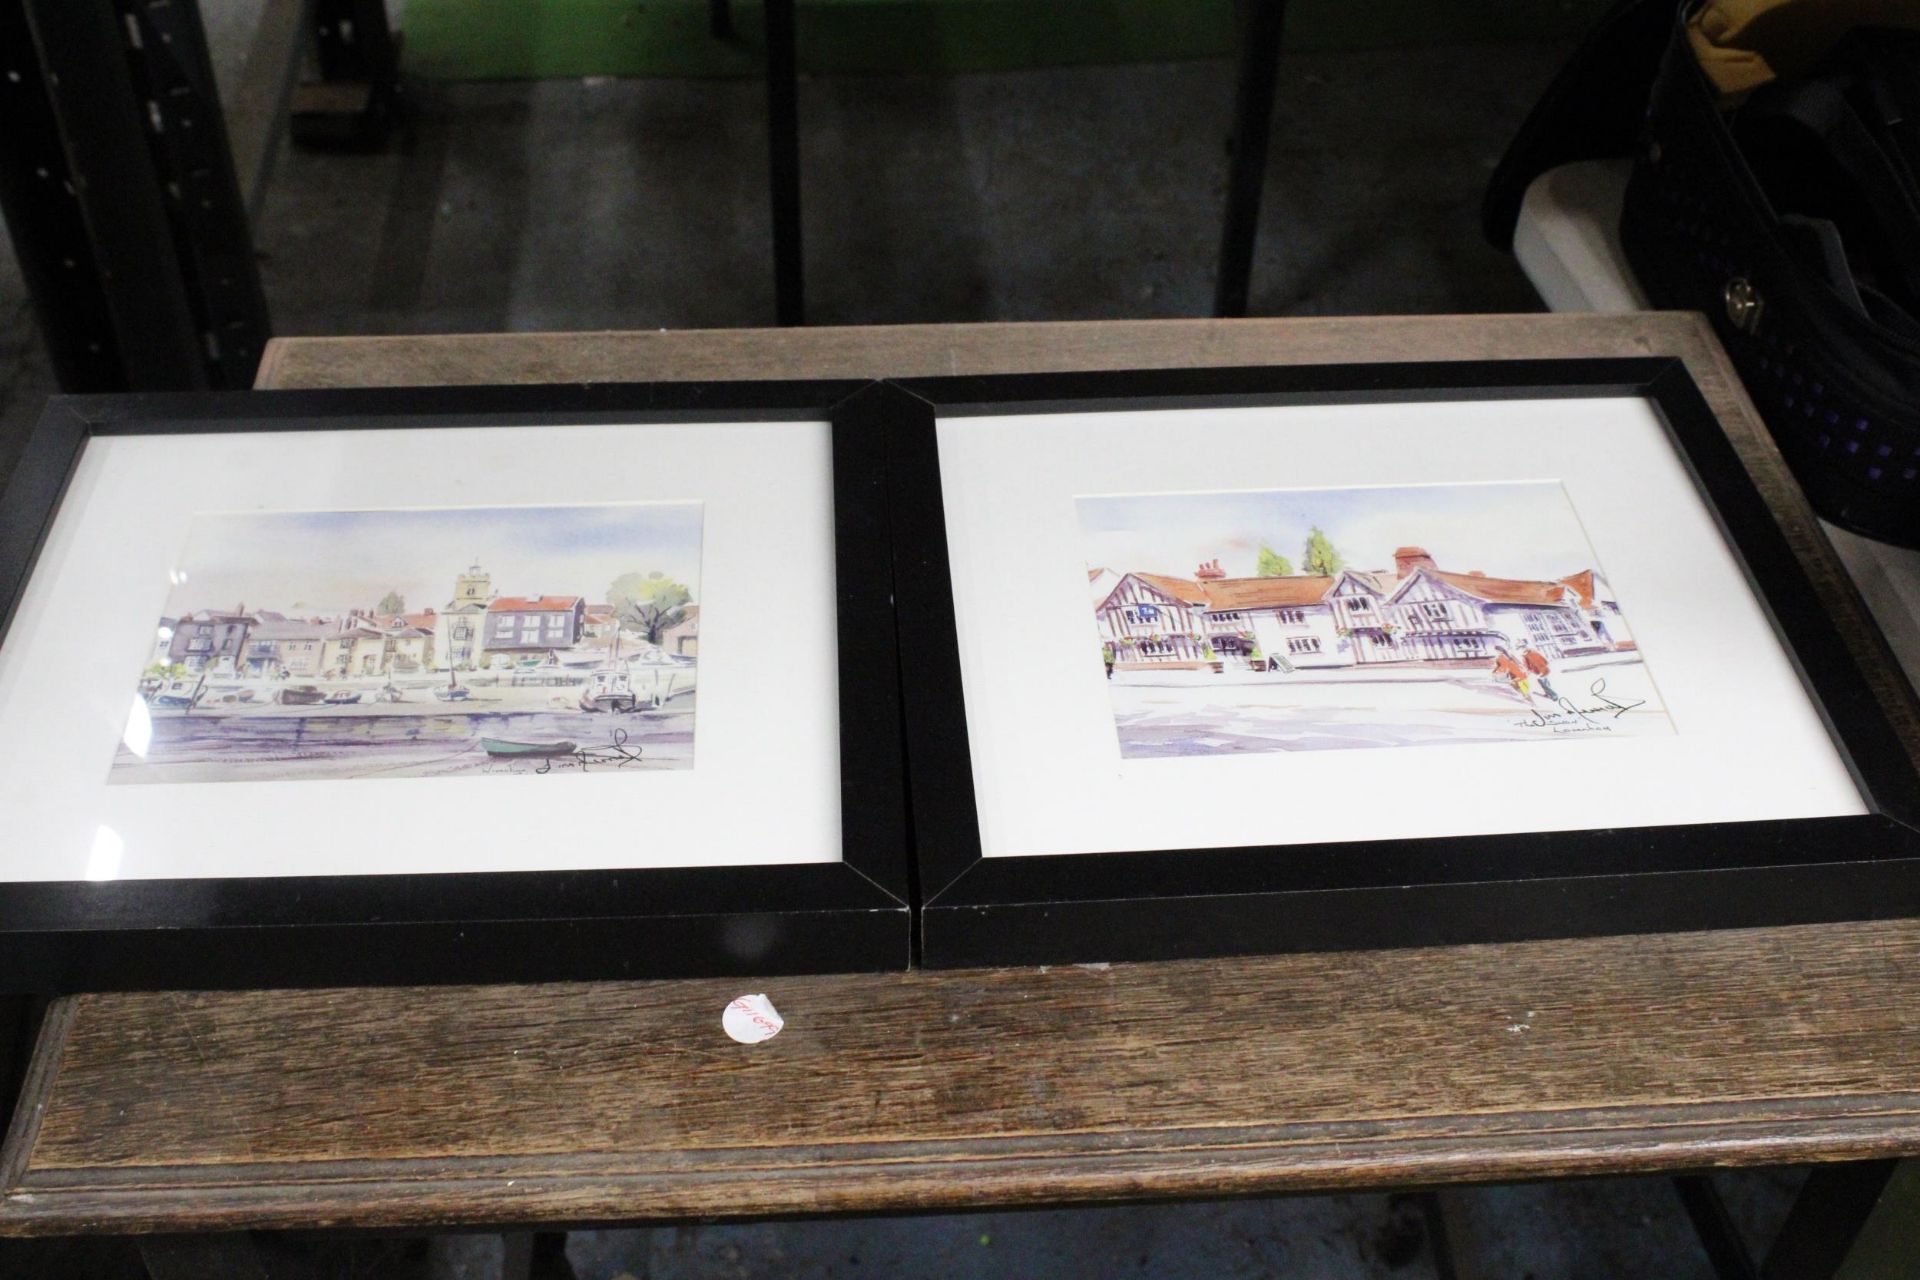 TWO FRAMED WATERCOLOURS ONE OF A BOATING SCENE AND THE OTHER A TOWN SCENE BOTH WITH SIGNATURES